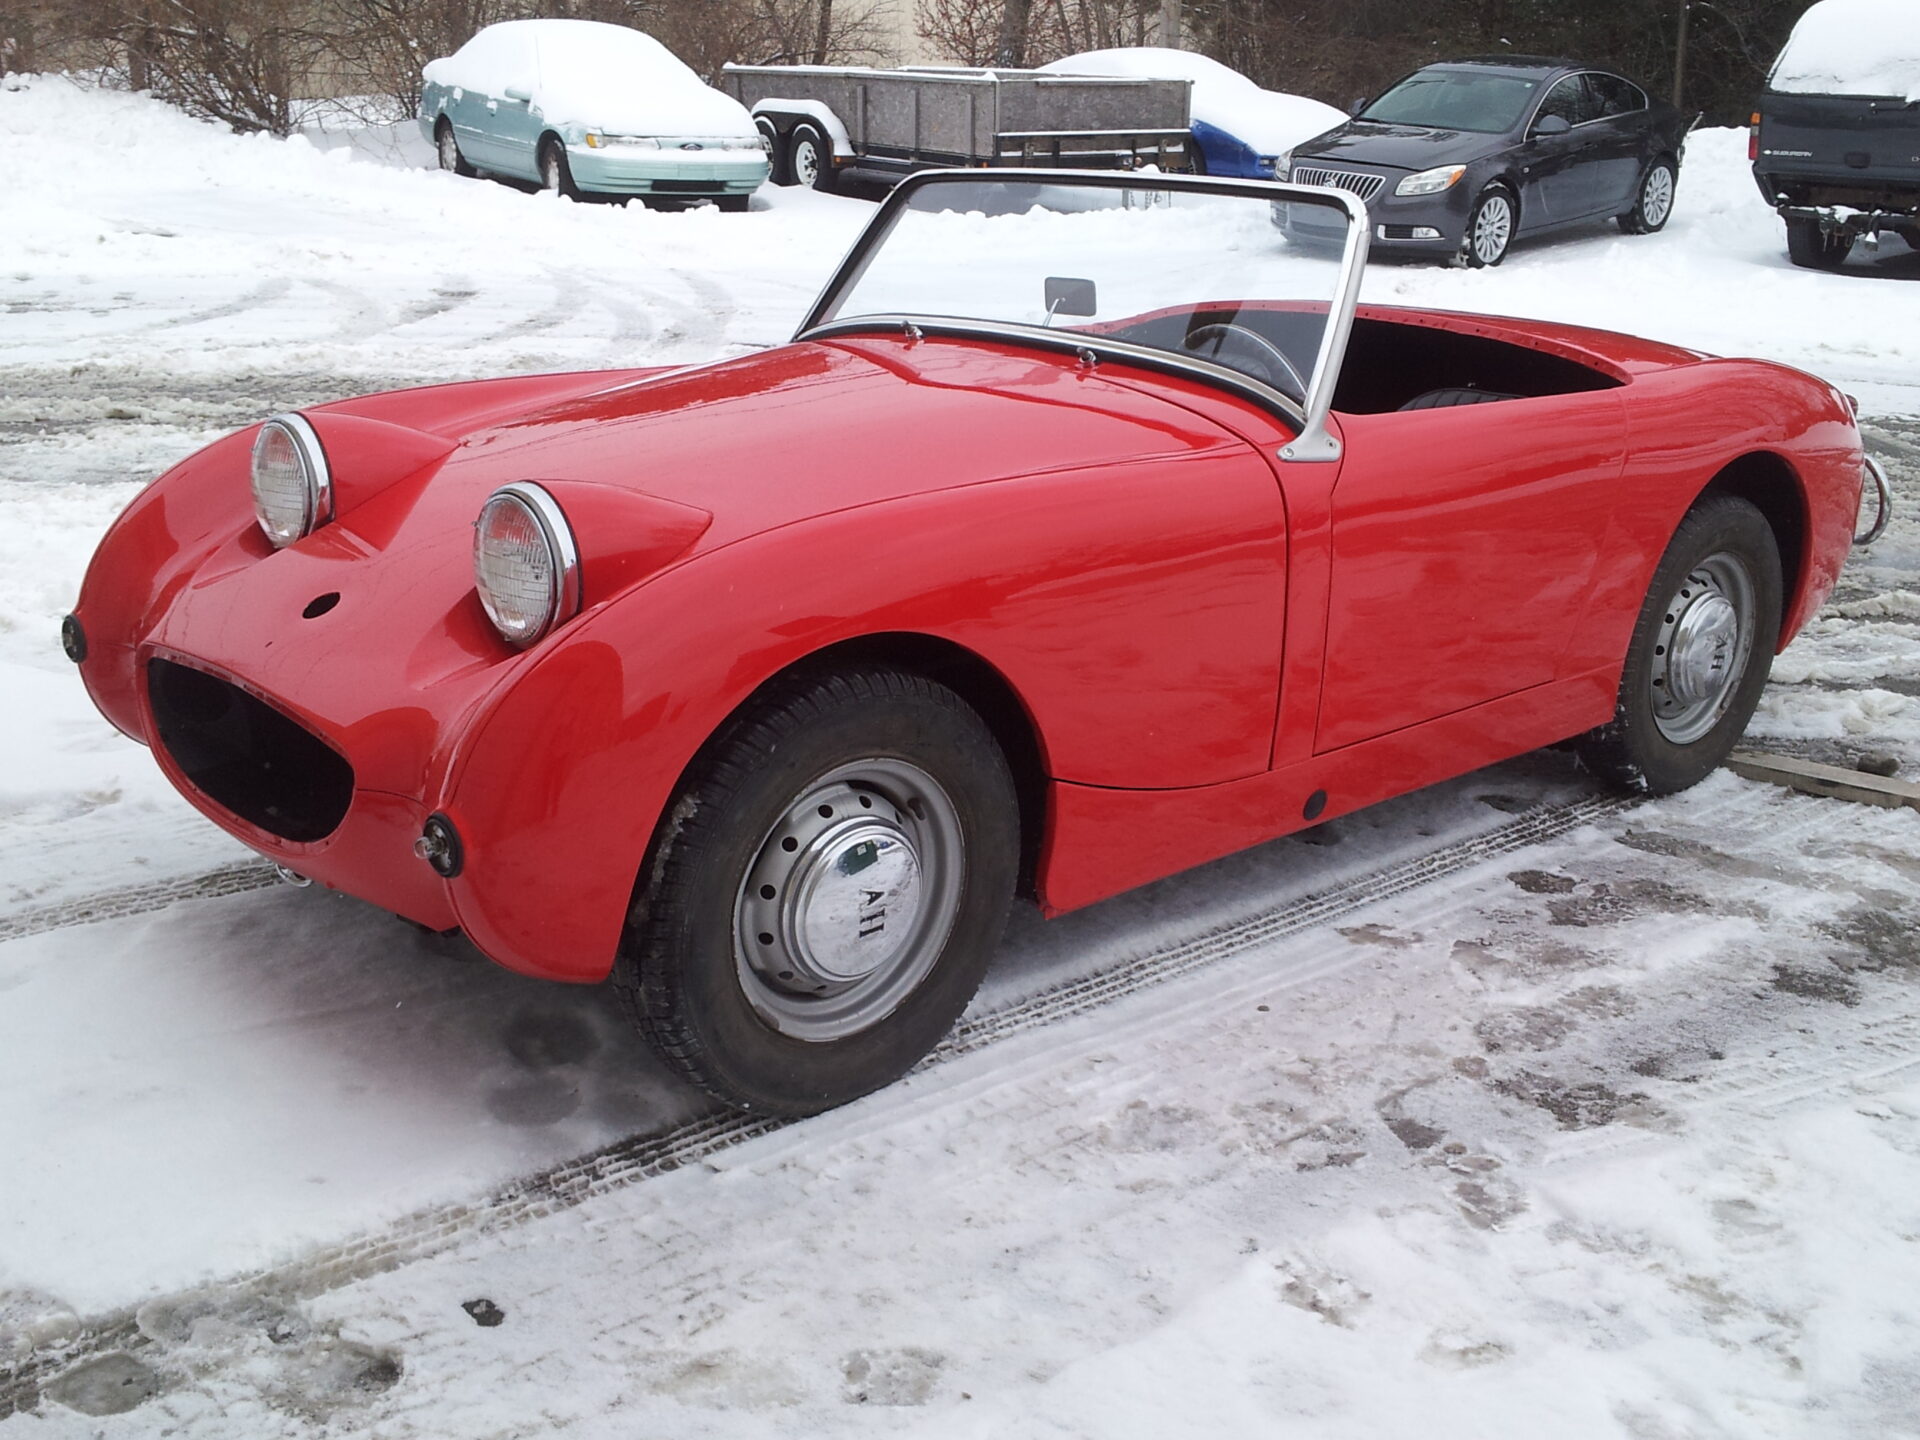 A completed 1959 Austin Healey in the snow